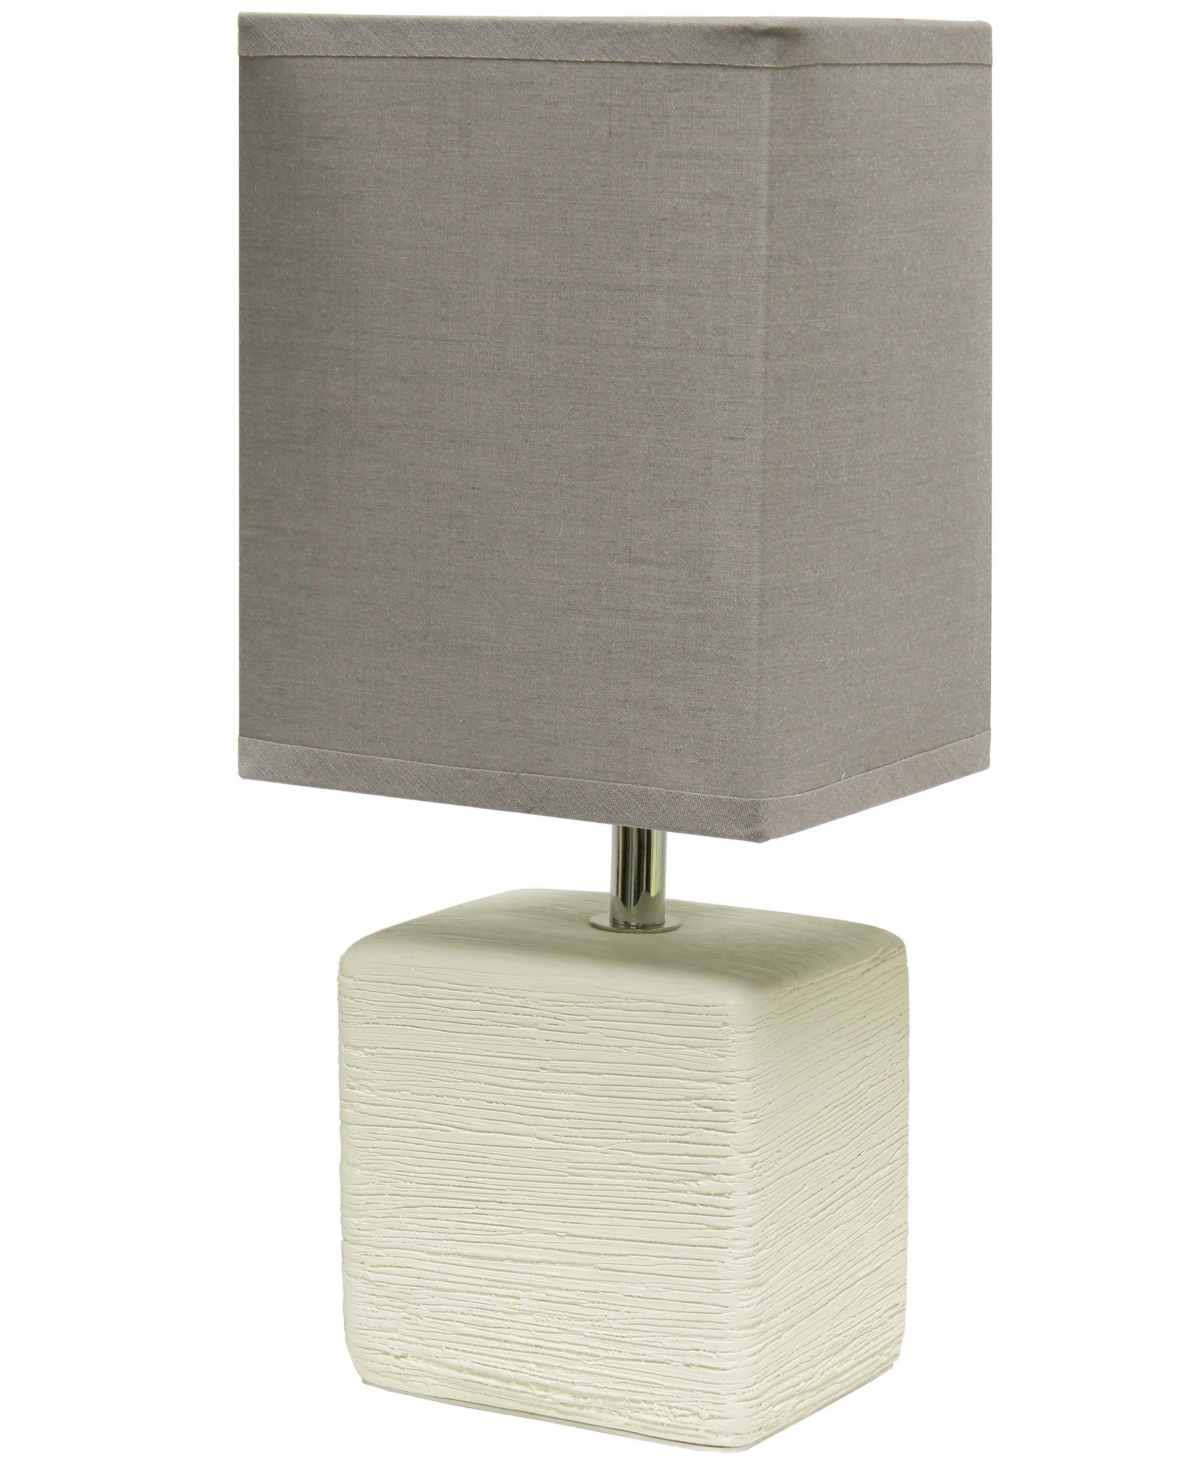 Simple Designs Petite Stone Table Lamp With Shade In Off White Base,gray Shade